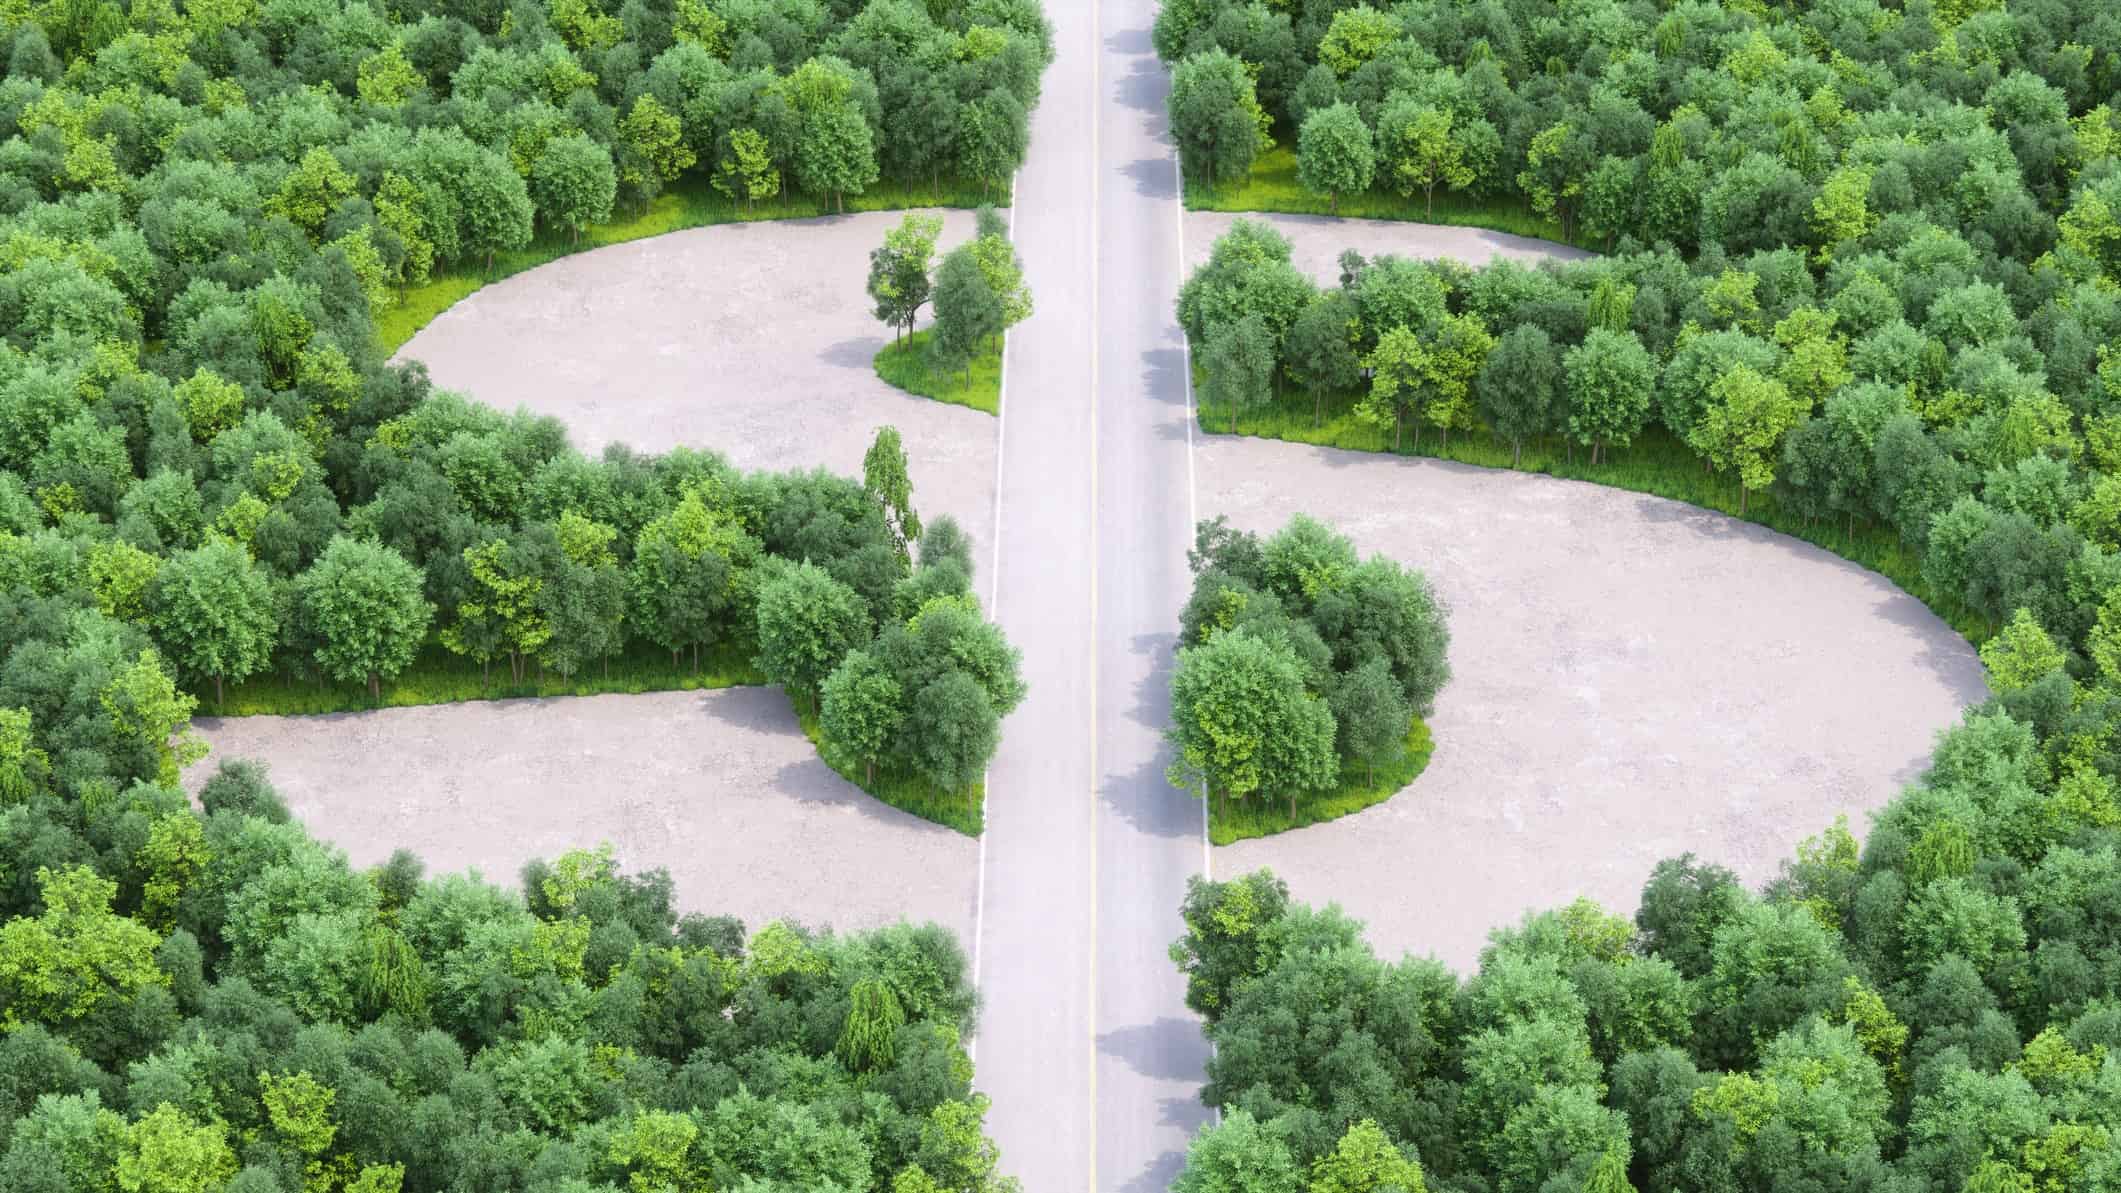 Trees and a road shapes a dollar sign of green, indicating the share price movement of ASX eco companies